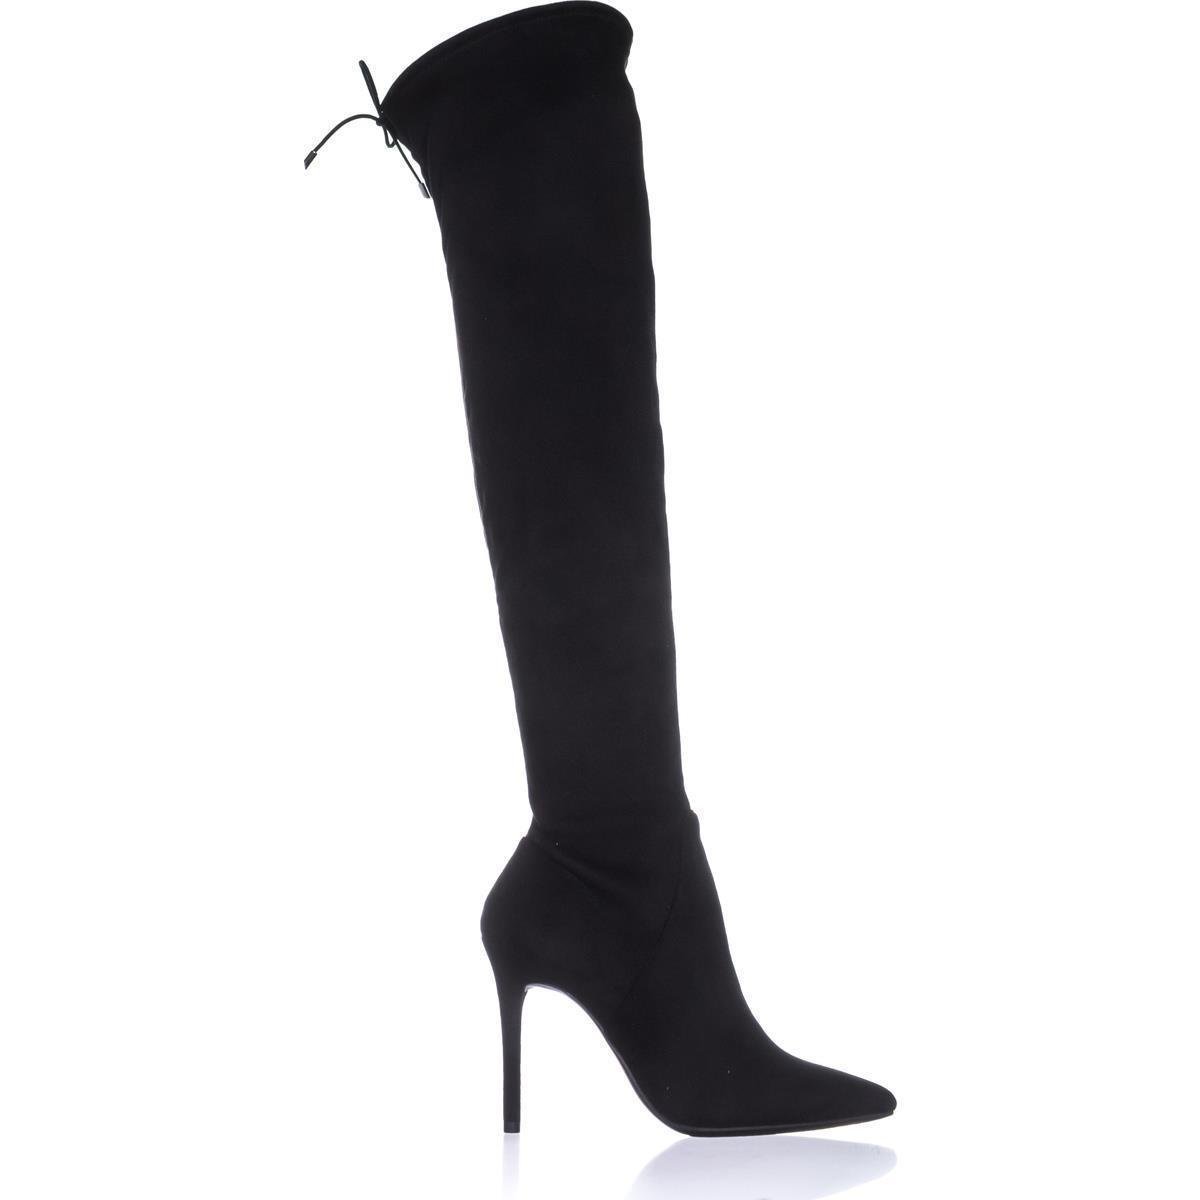 Jessica Simpson Womens Lessy Pointed Toe Over Knee Fashion Boots | eBay1200 x 1200